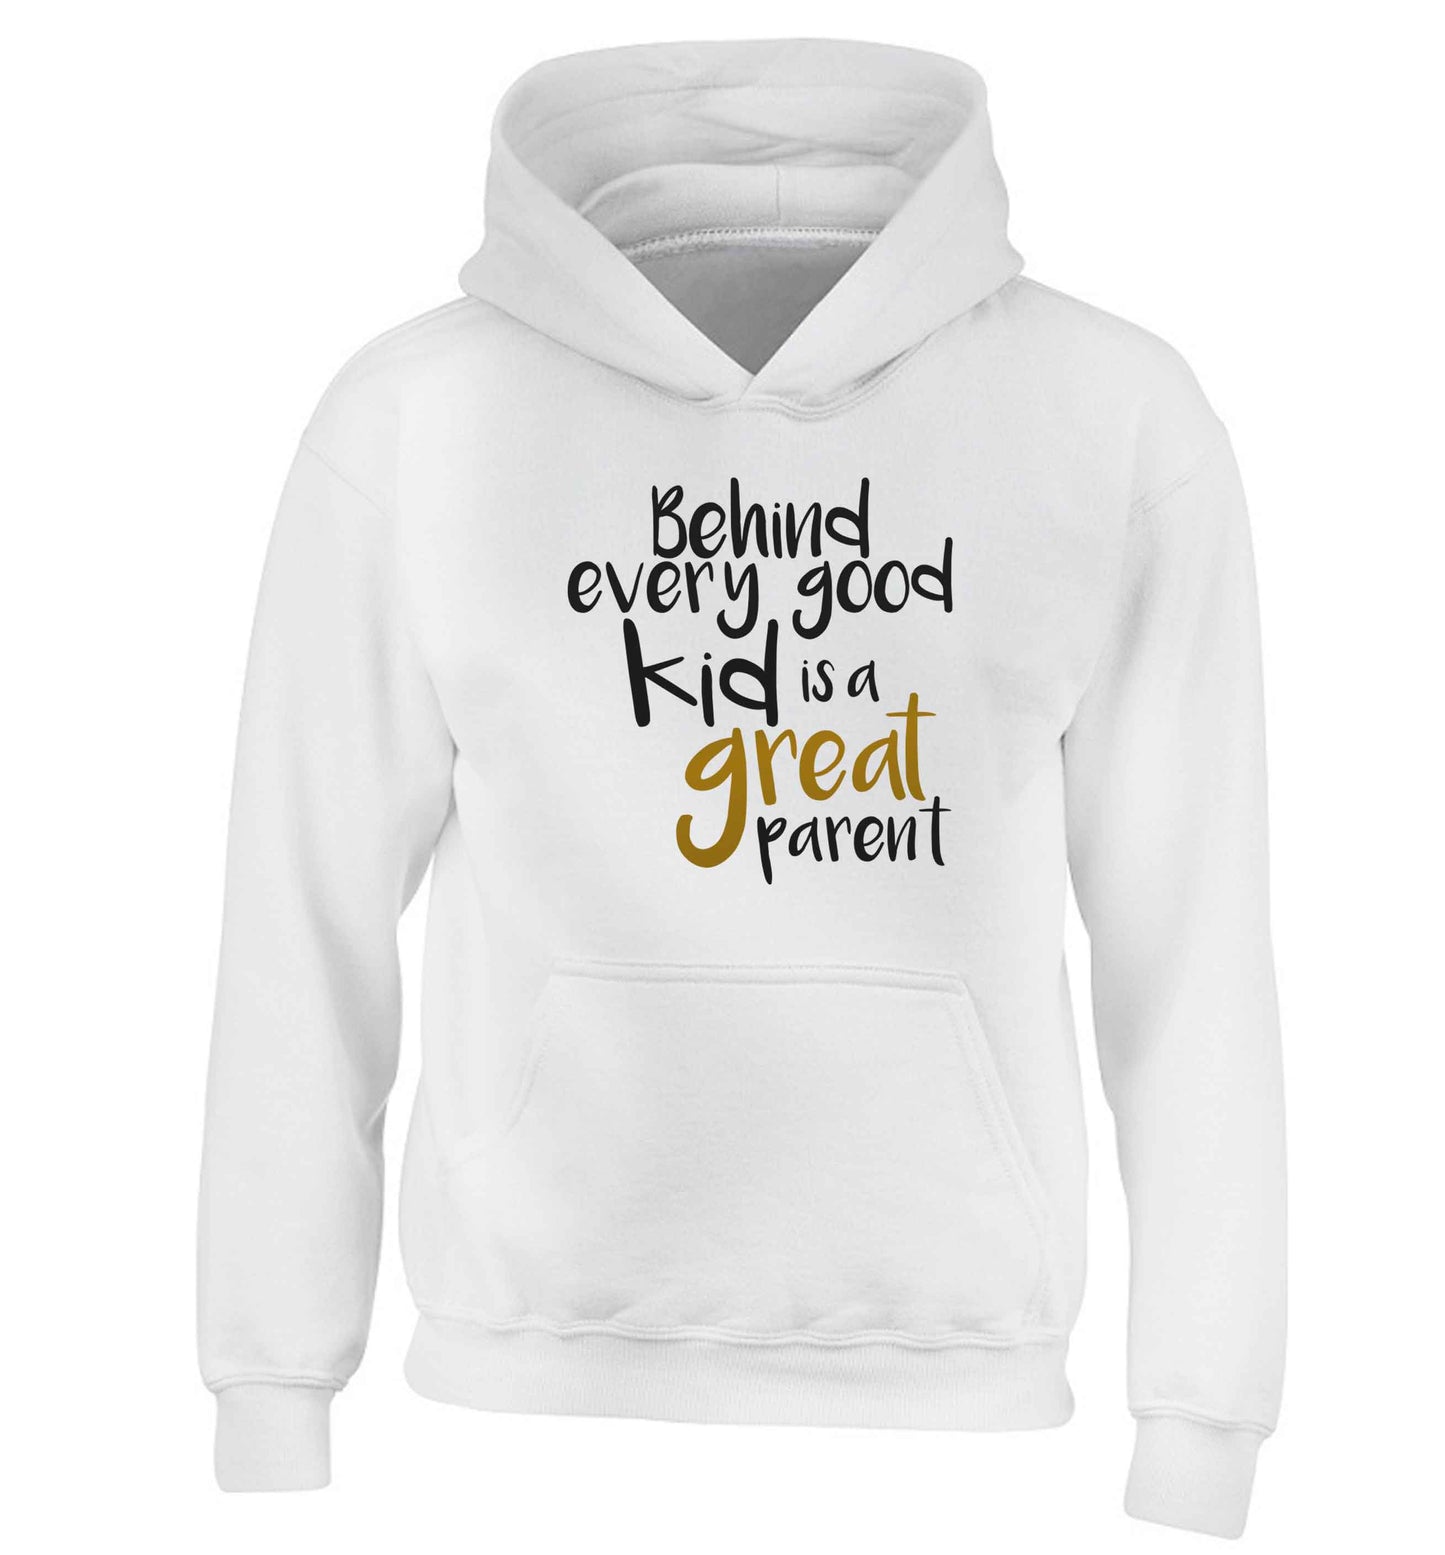 Behind every good kid is a great parent children's white hoodie 12-13 Years